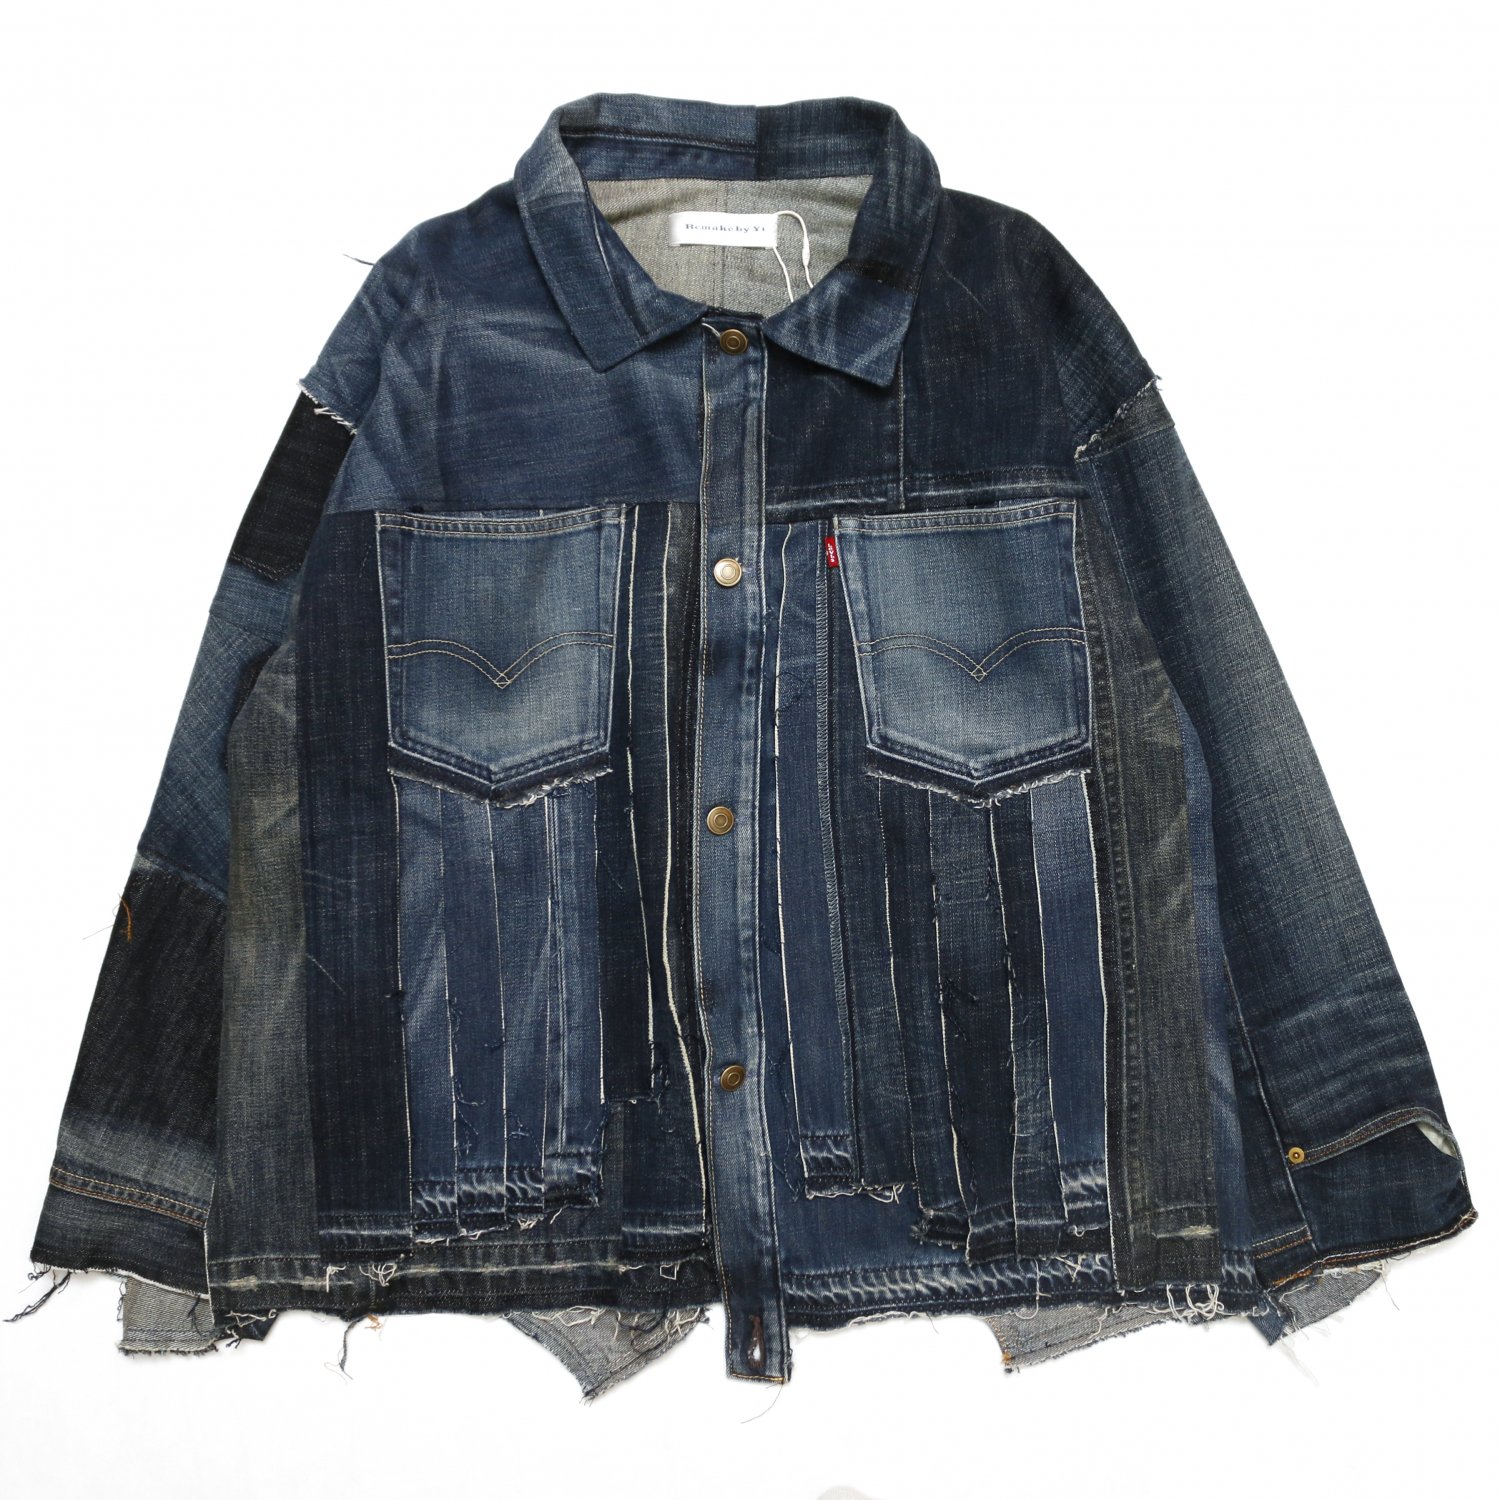 <img class='new_mark_img1' src='https://img.shop-pro.jp/img/new/icons8.gif' style='border:none;display:inline;margin:0px;padding:0px;width:auto;' />Remake by Yi / Denim Jacket (Vintage Levis denim)